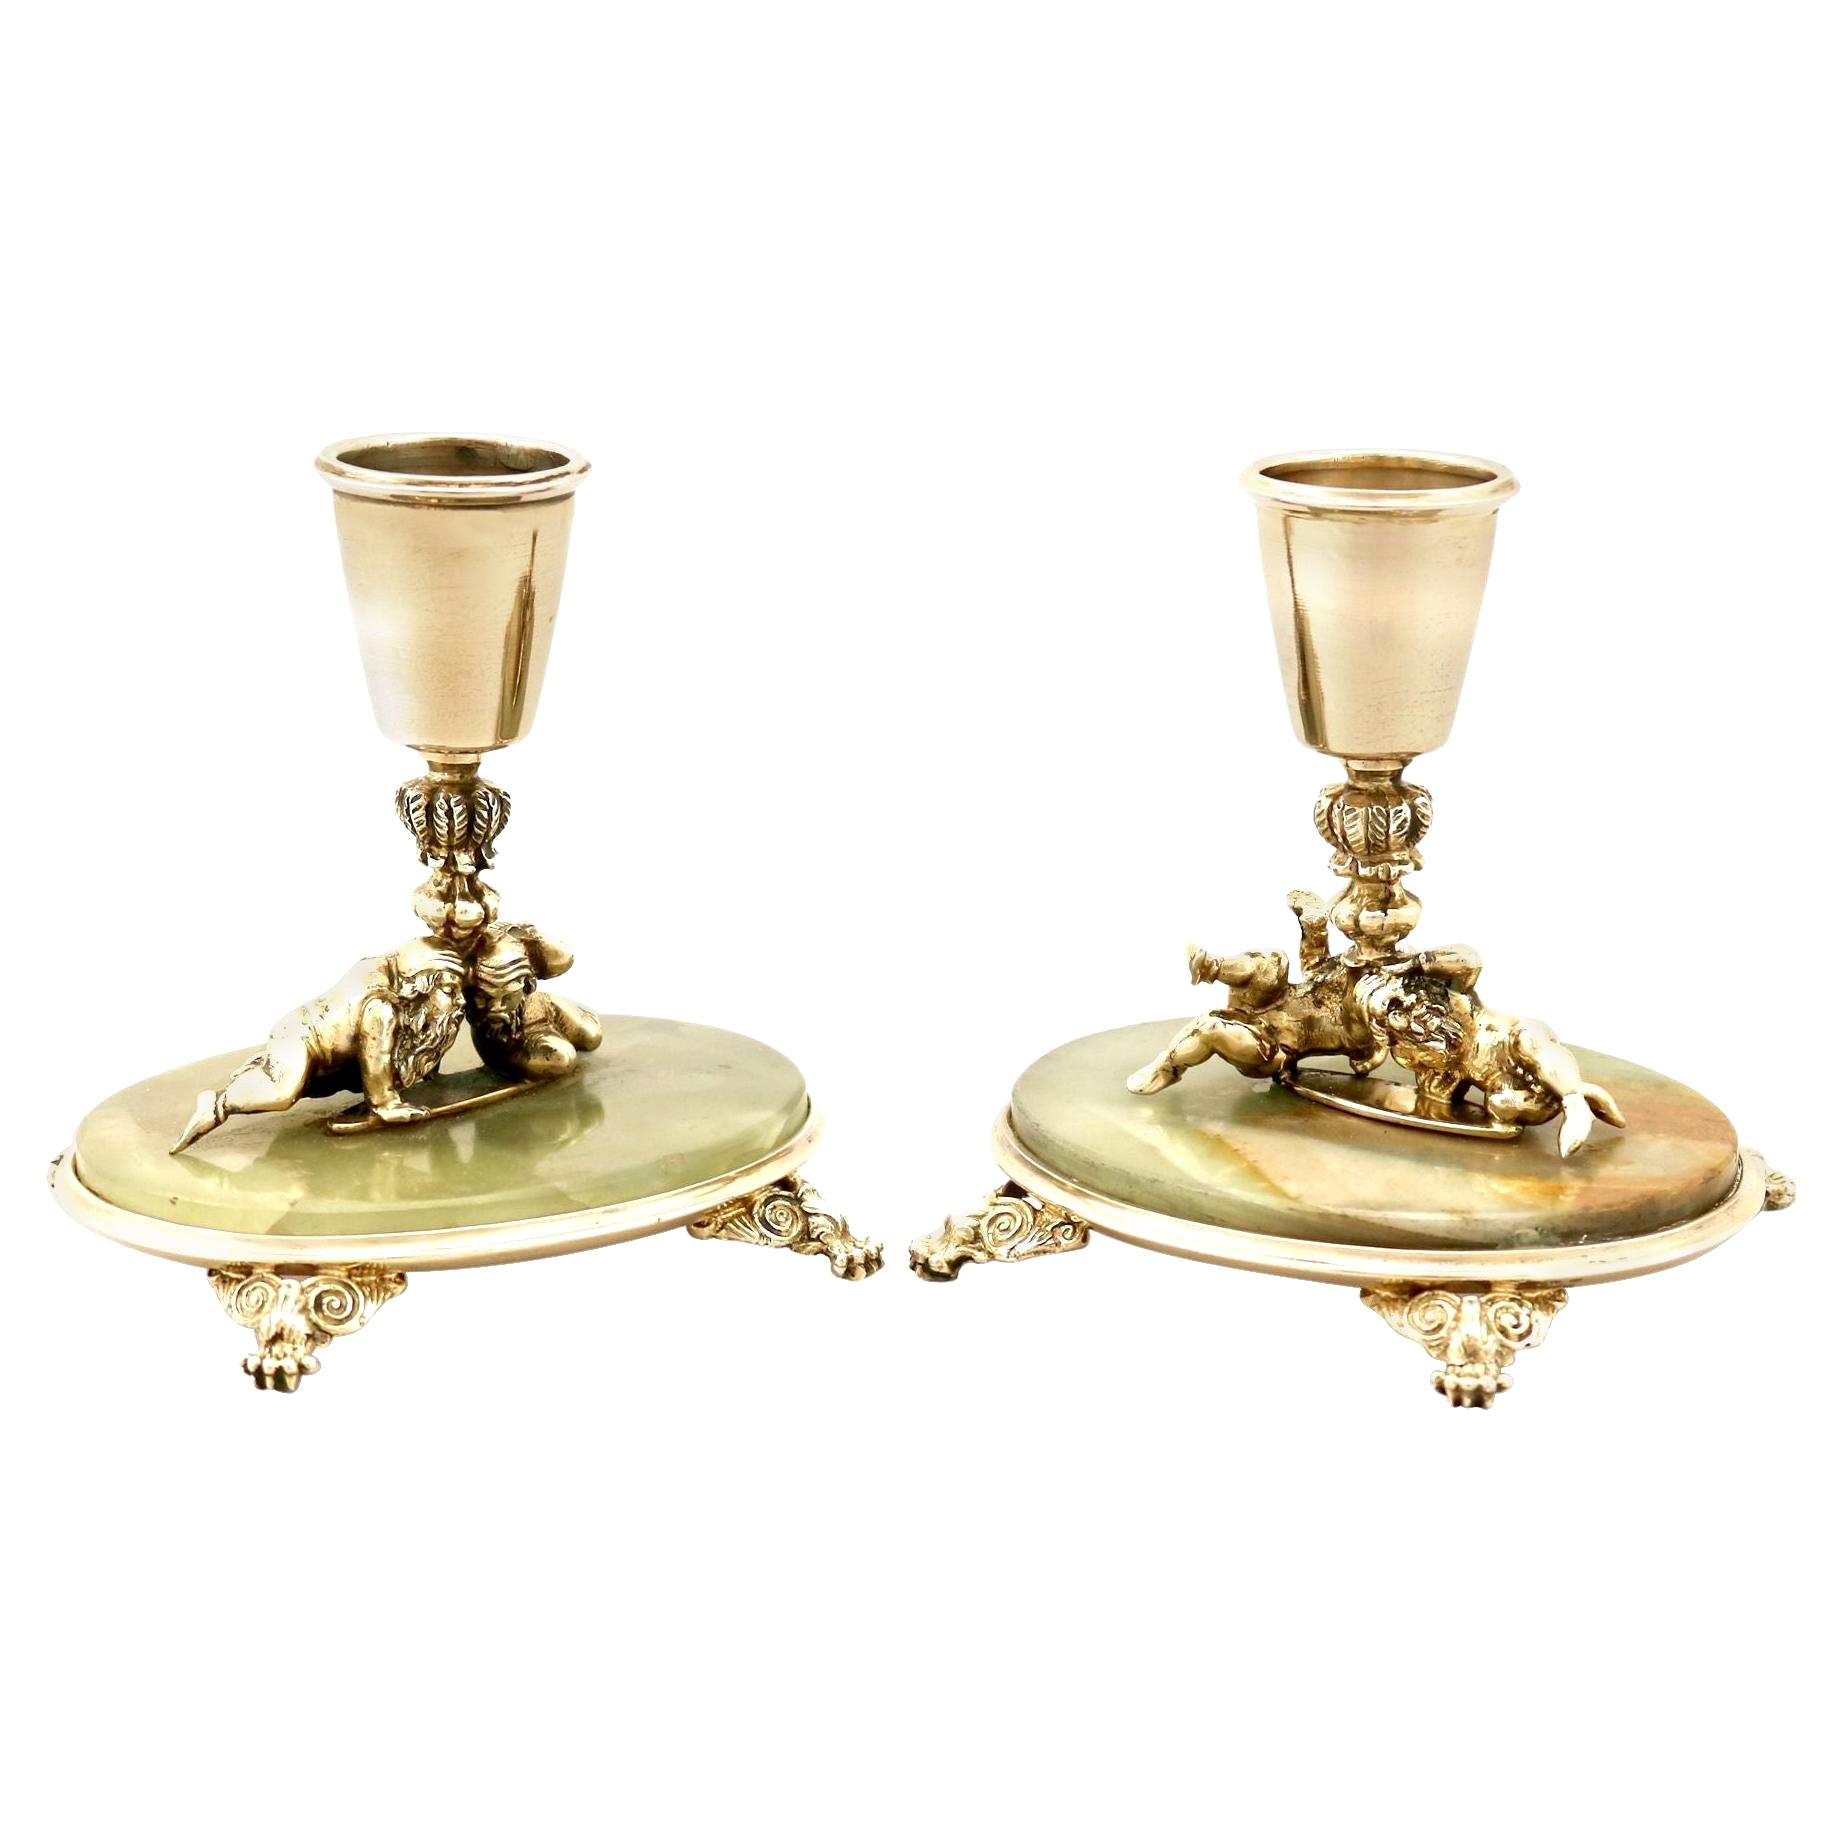 Antique Italian Silver Gilt and Marble Candlesticks For Sale